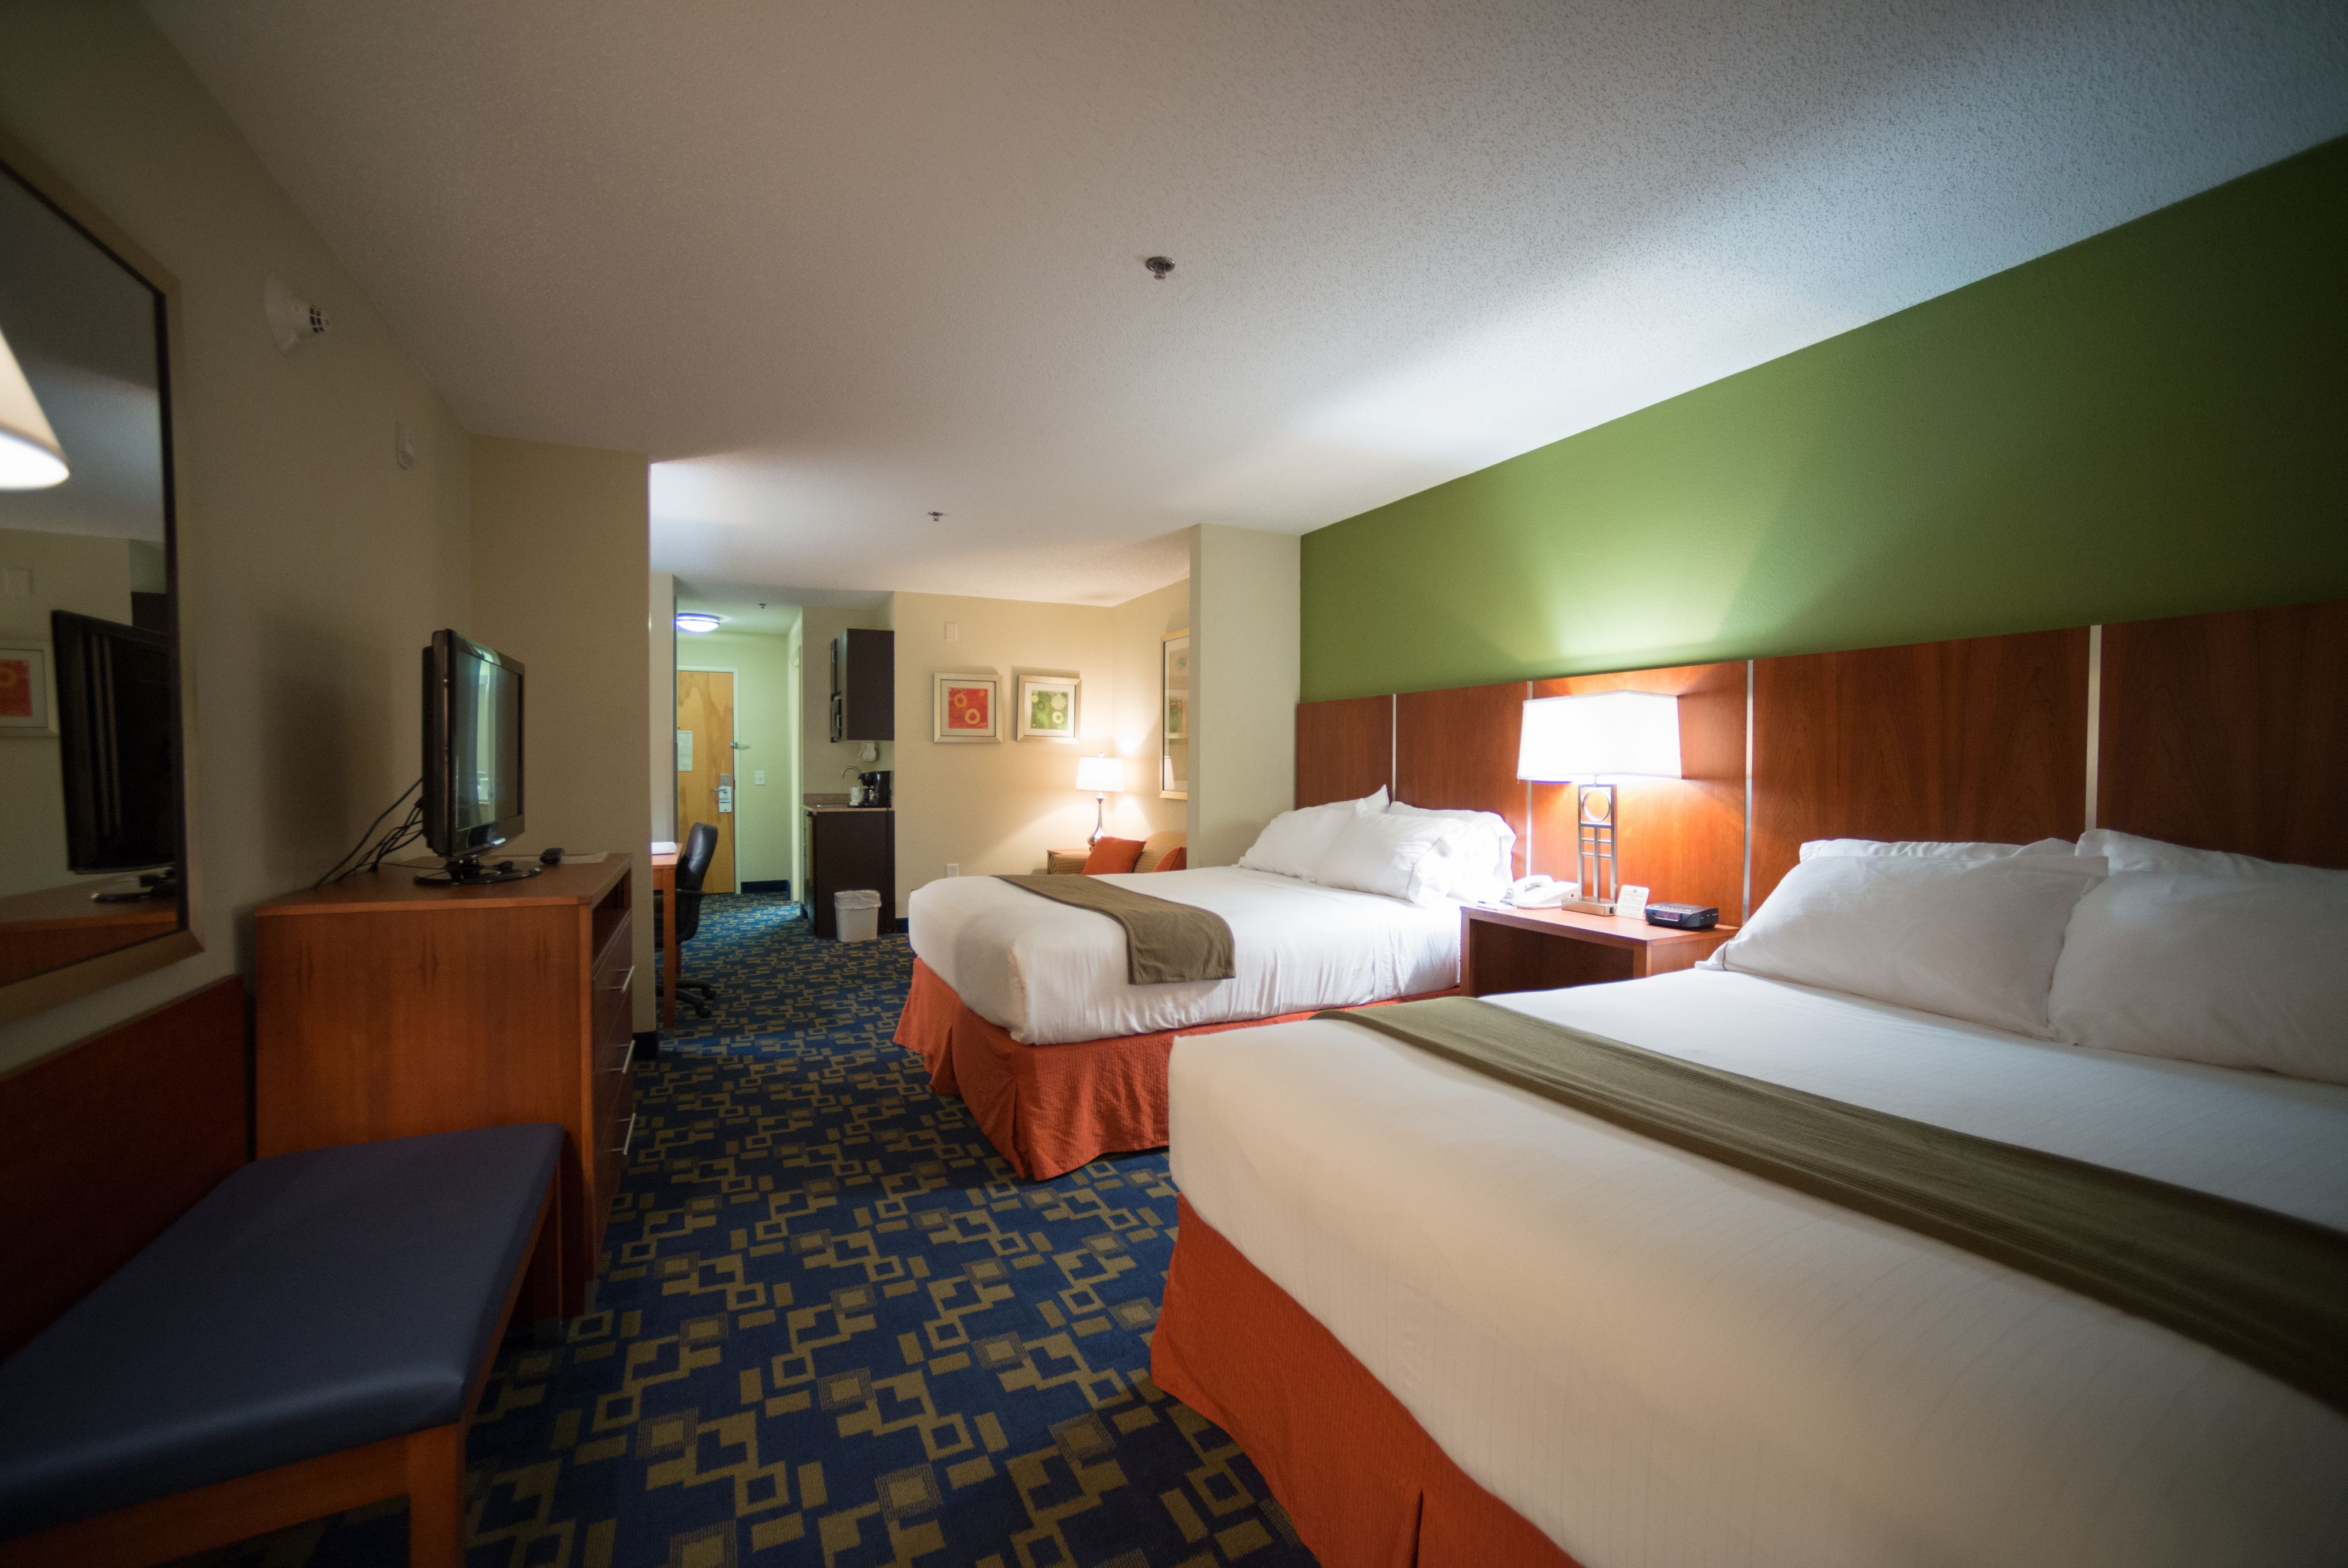 holiday-inn-express-and-suites-raleigh-3584101555-original.jpg